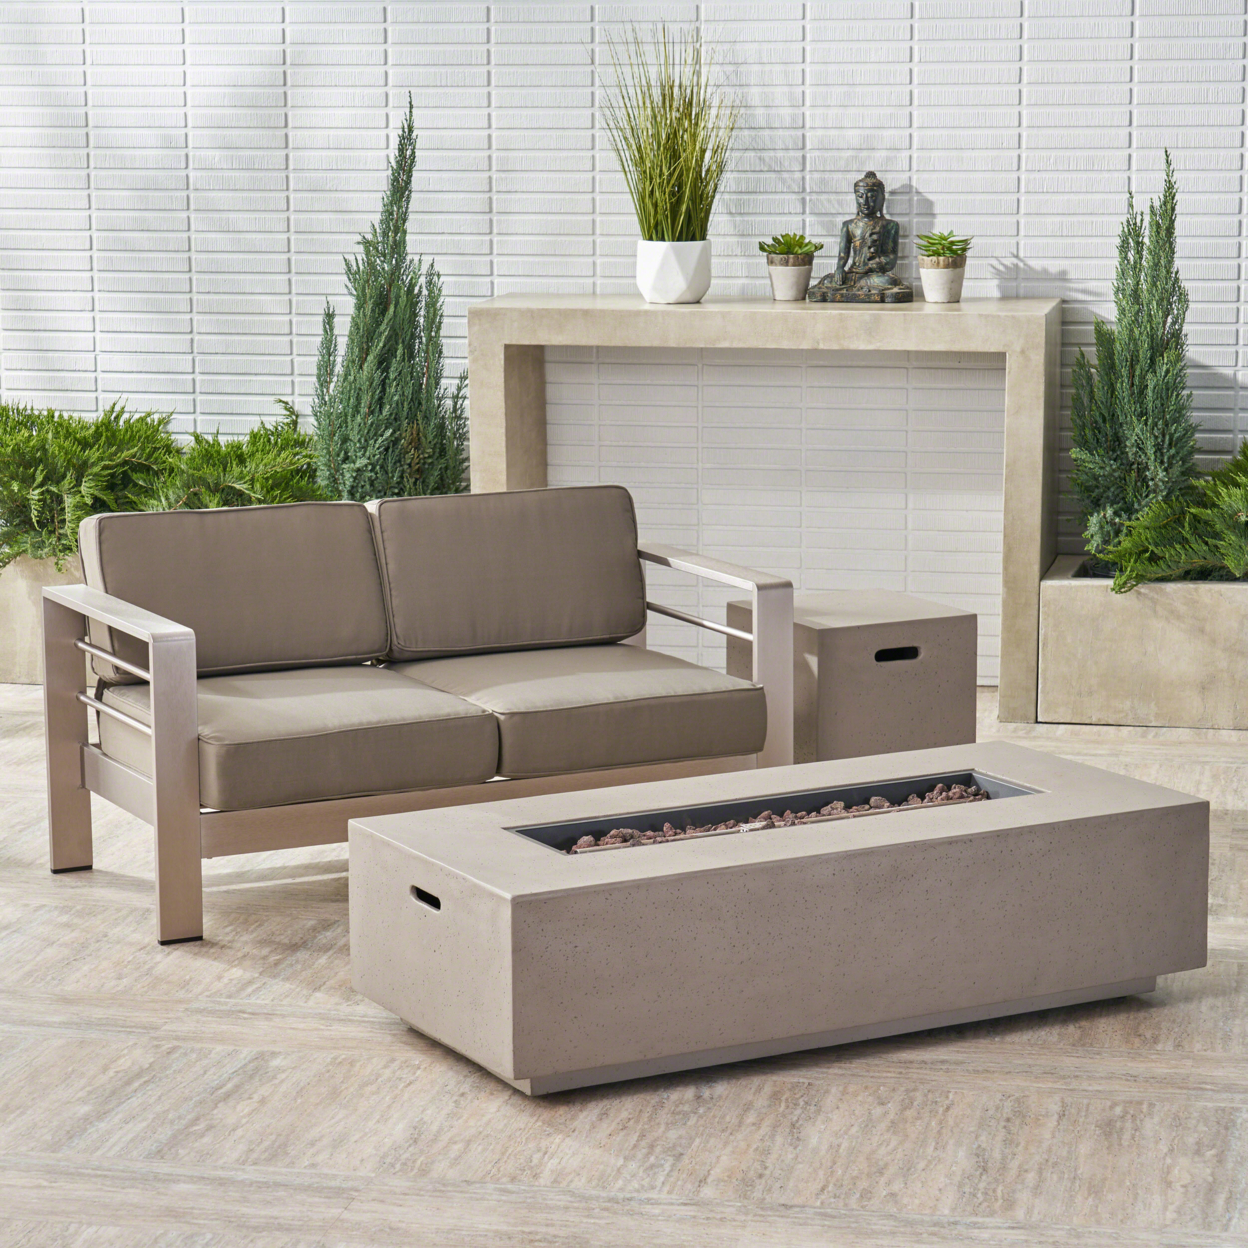 Danae Coral Outdoor Loveseat And Fire Pit Set - Khaki